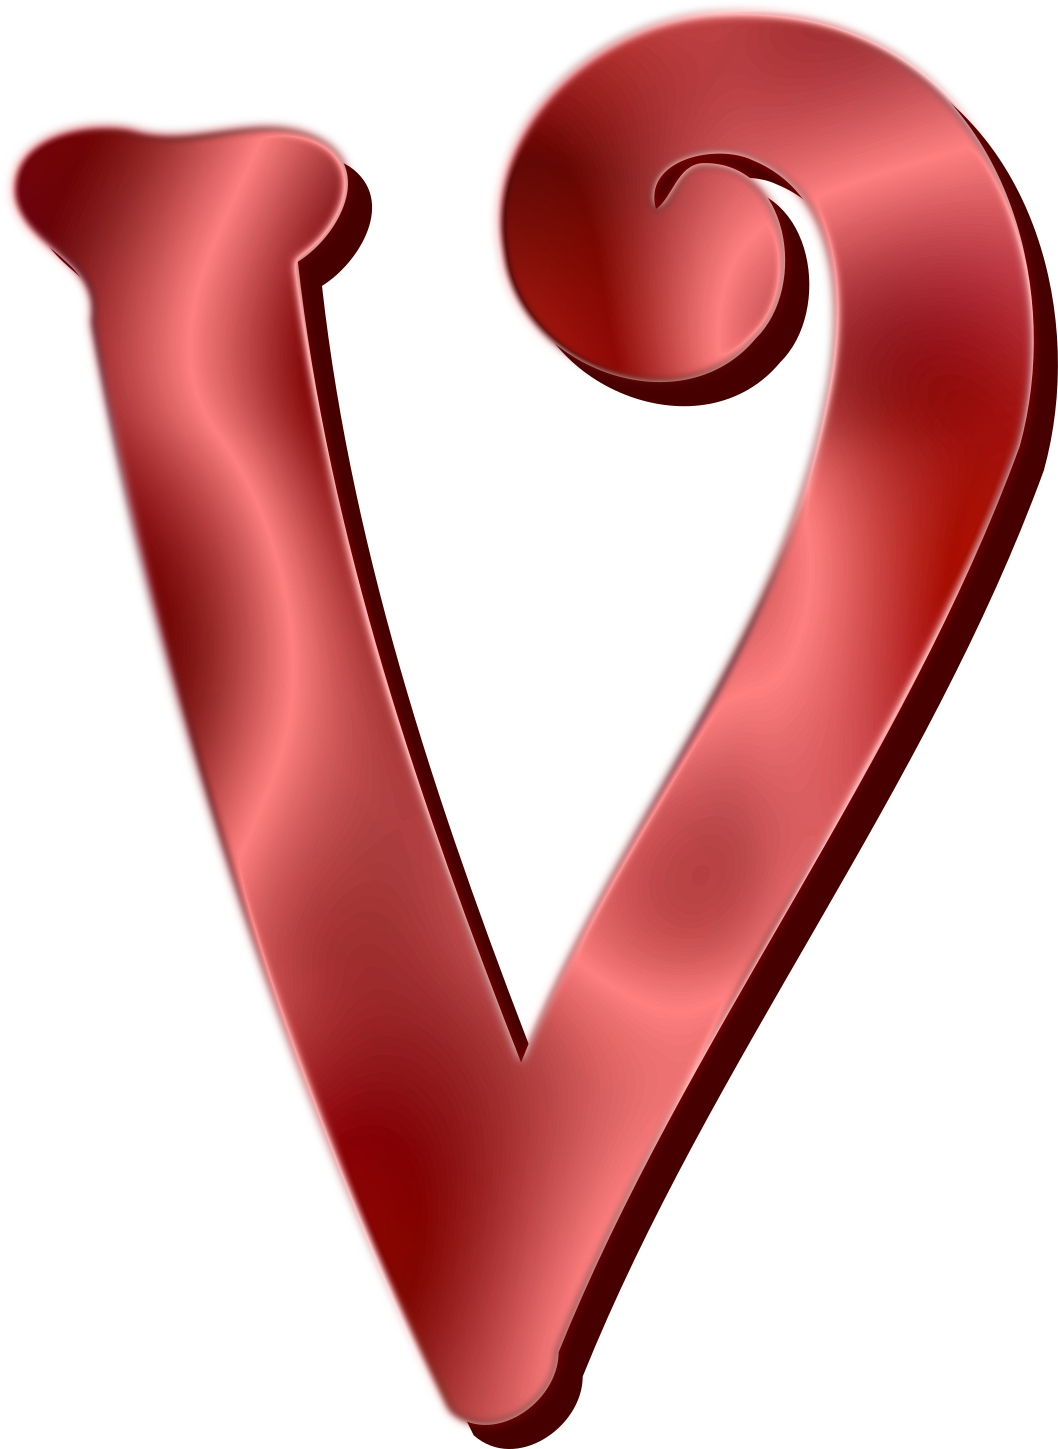 A Red Letter V With A Heart